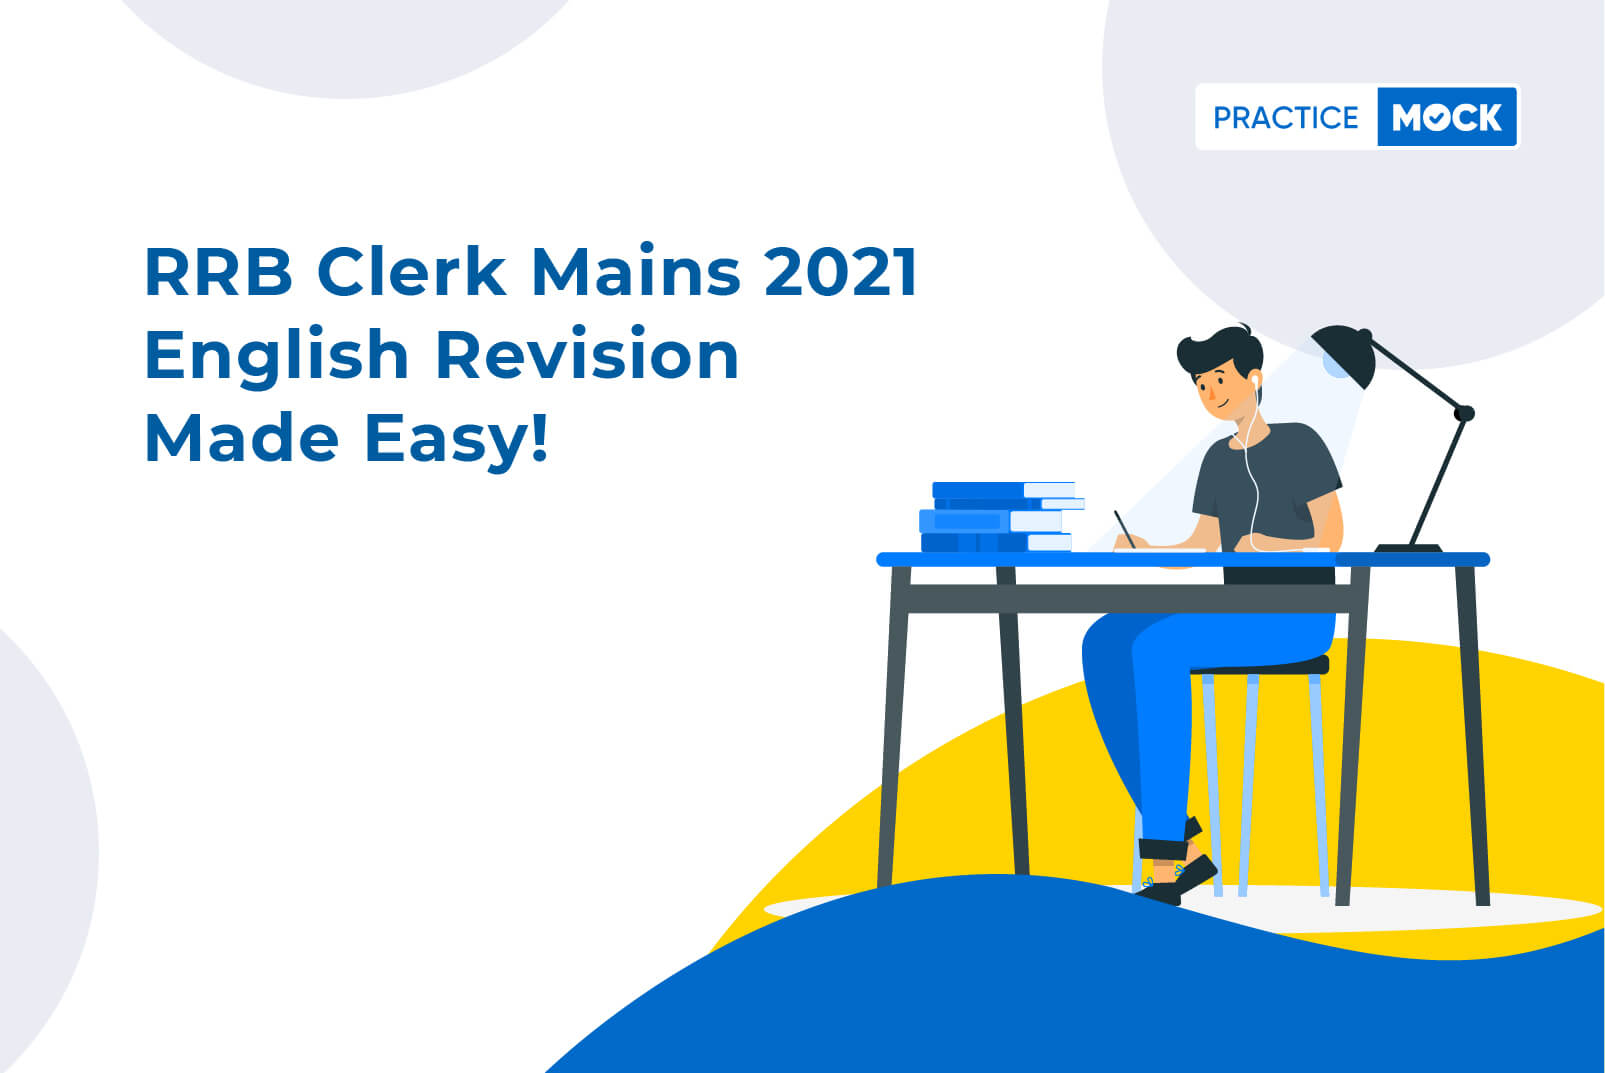 RRB Clerk Mains 2021-English Revision Strategy